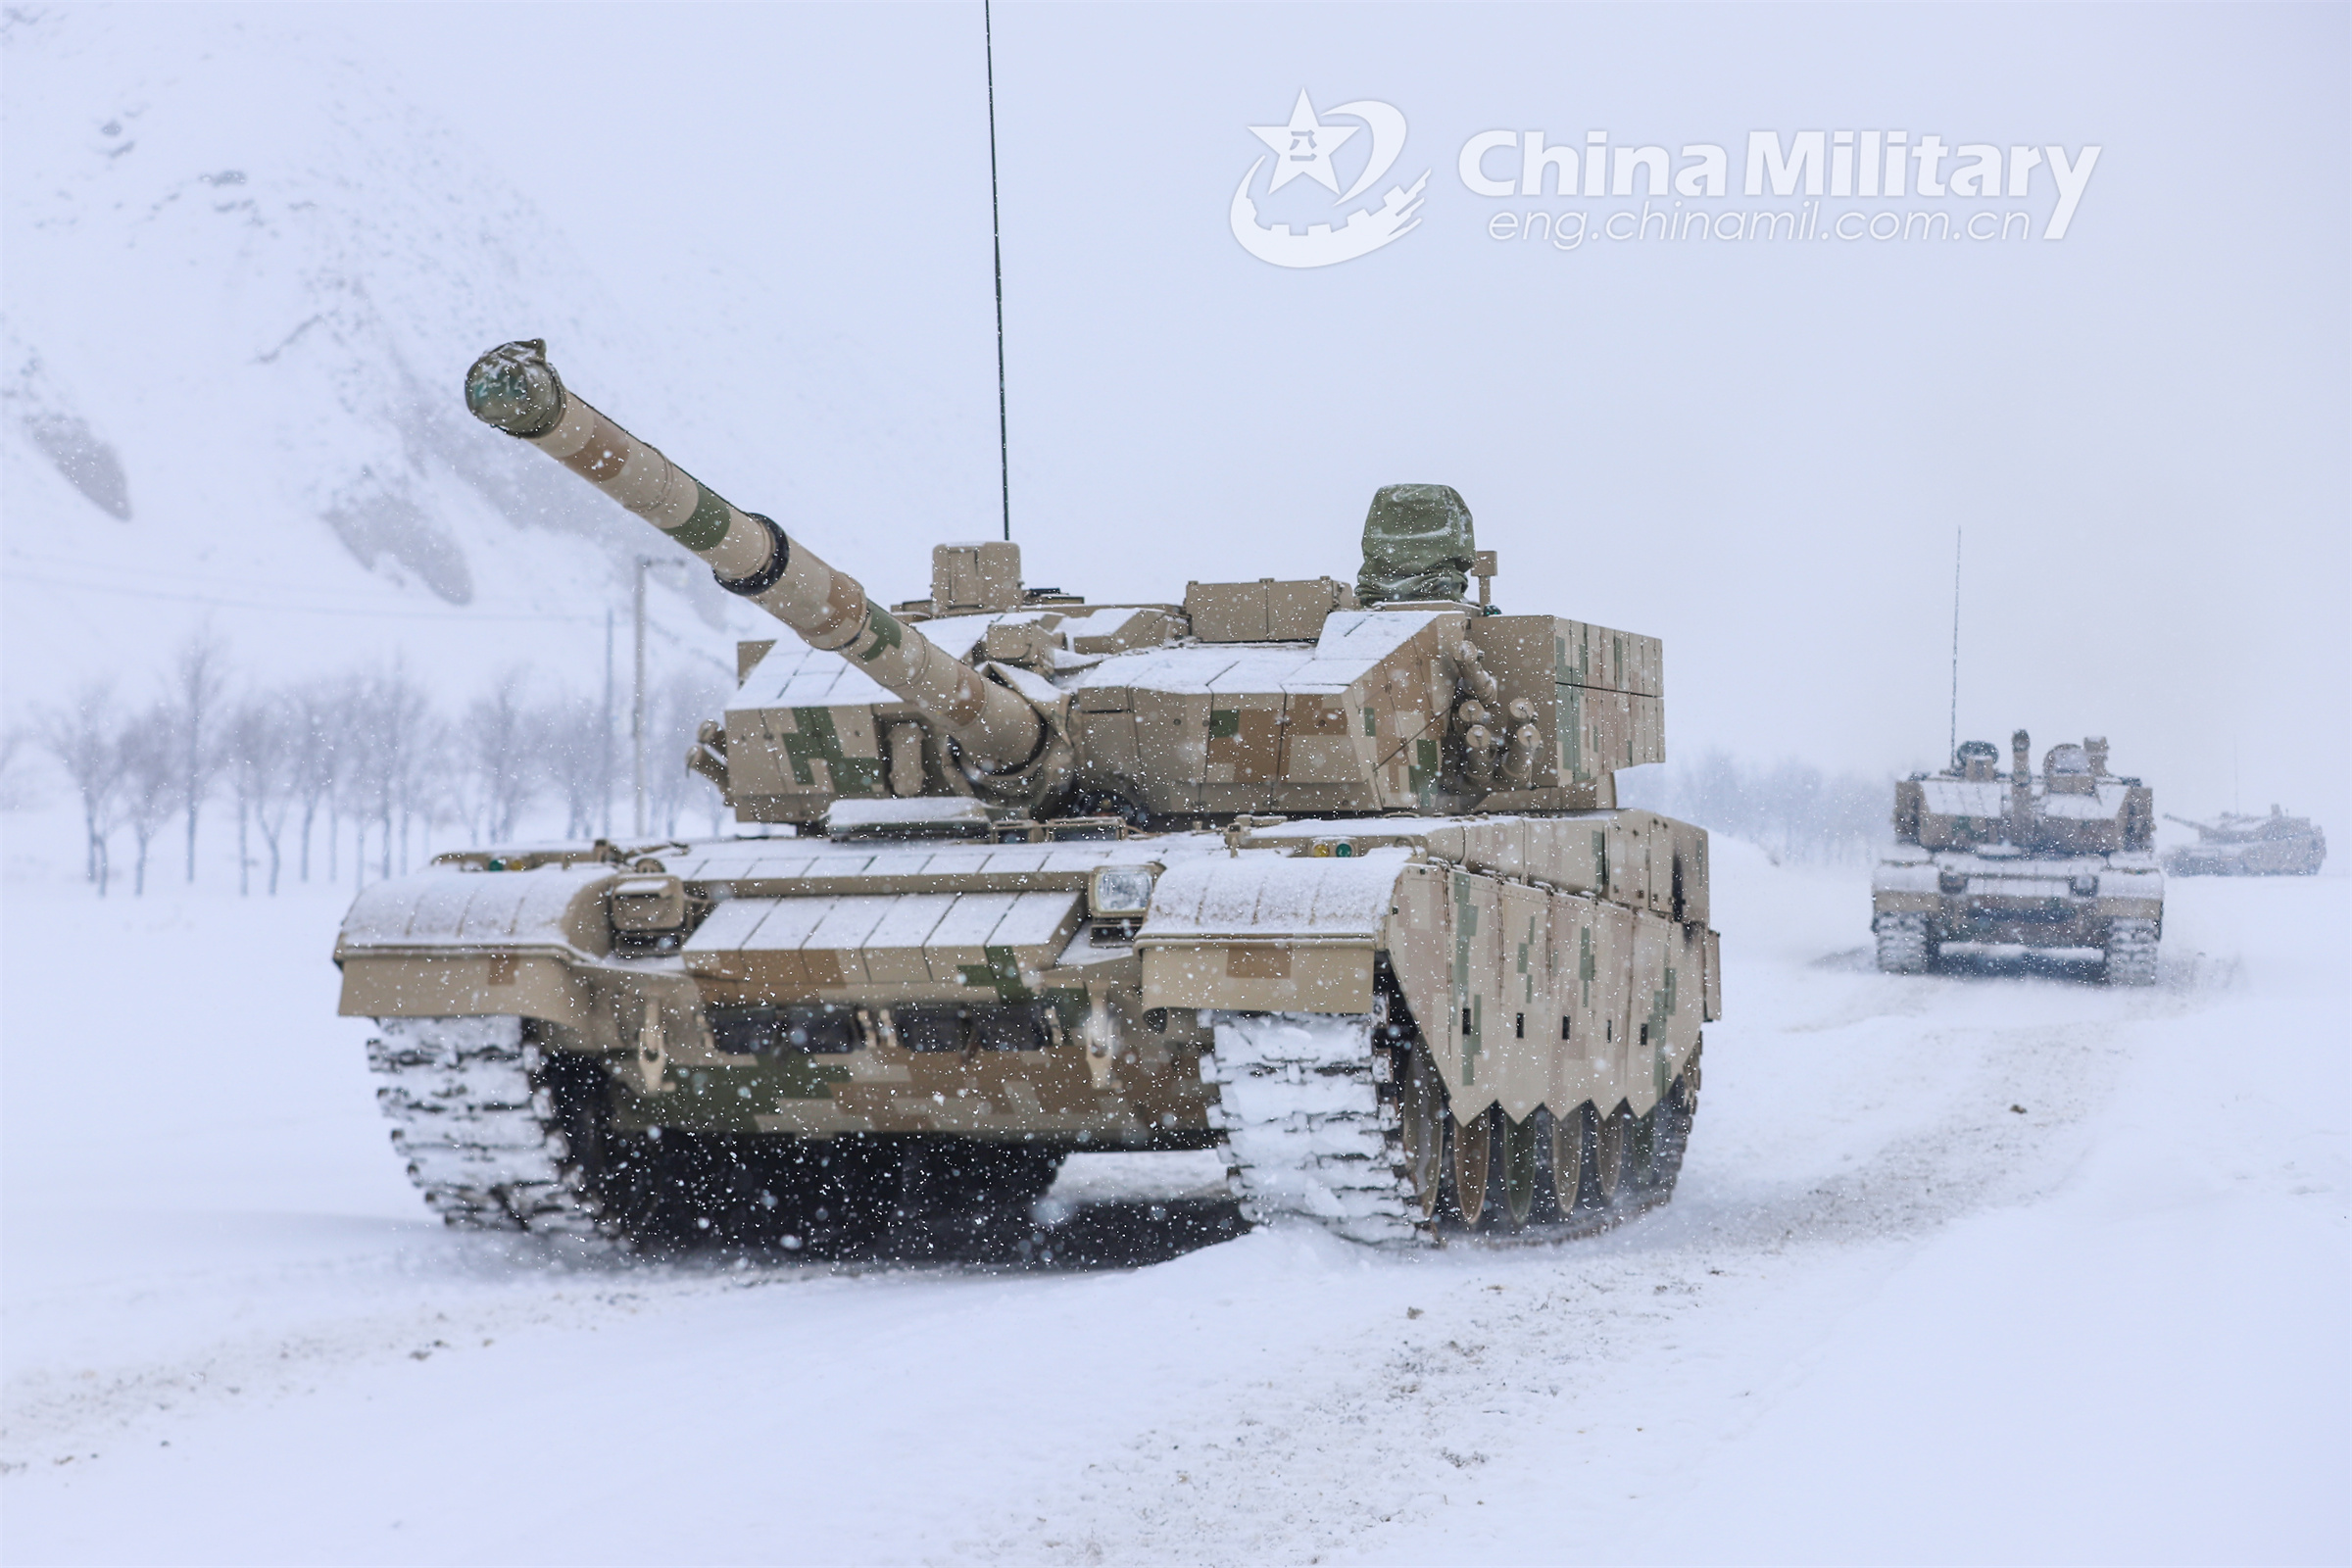 Main battle tanks rumble in snow-covered area - Photos - 中国军网